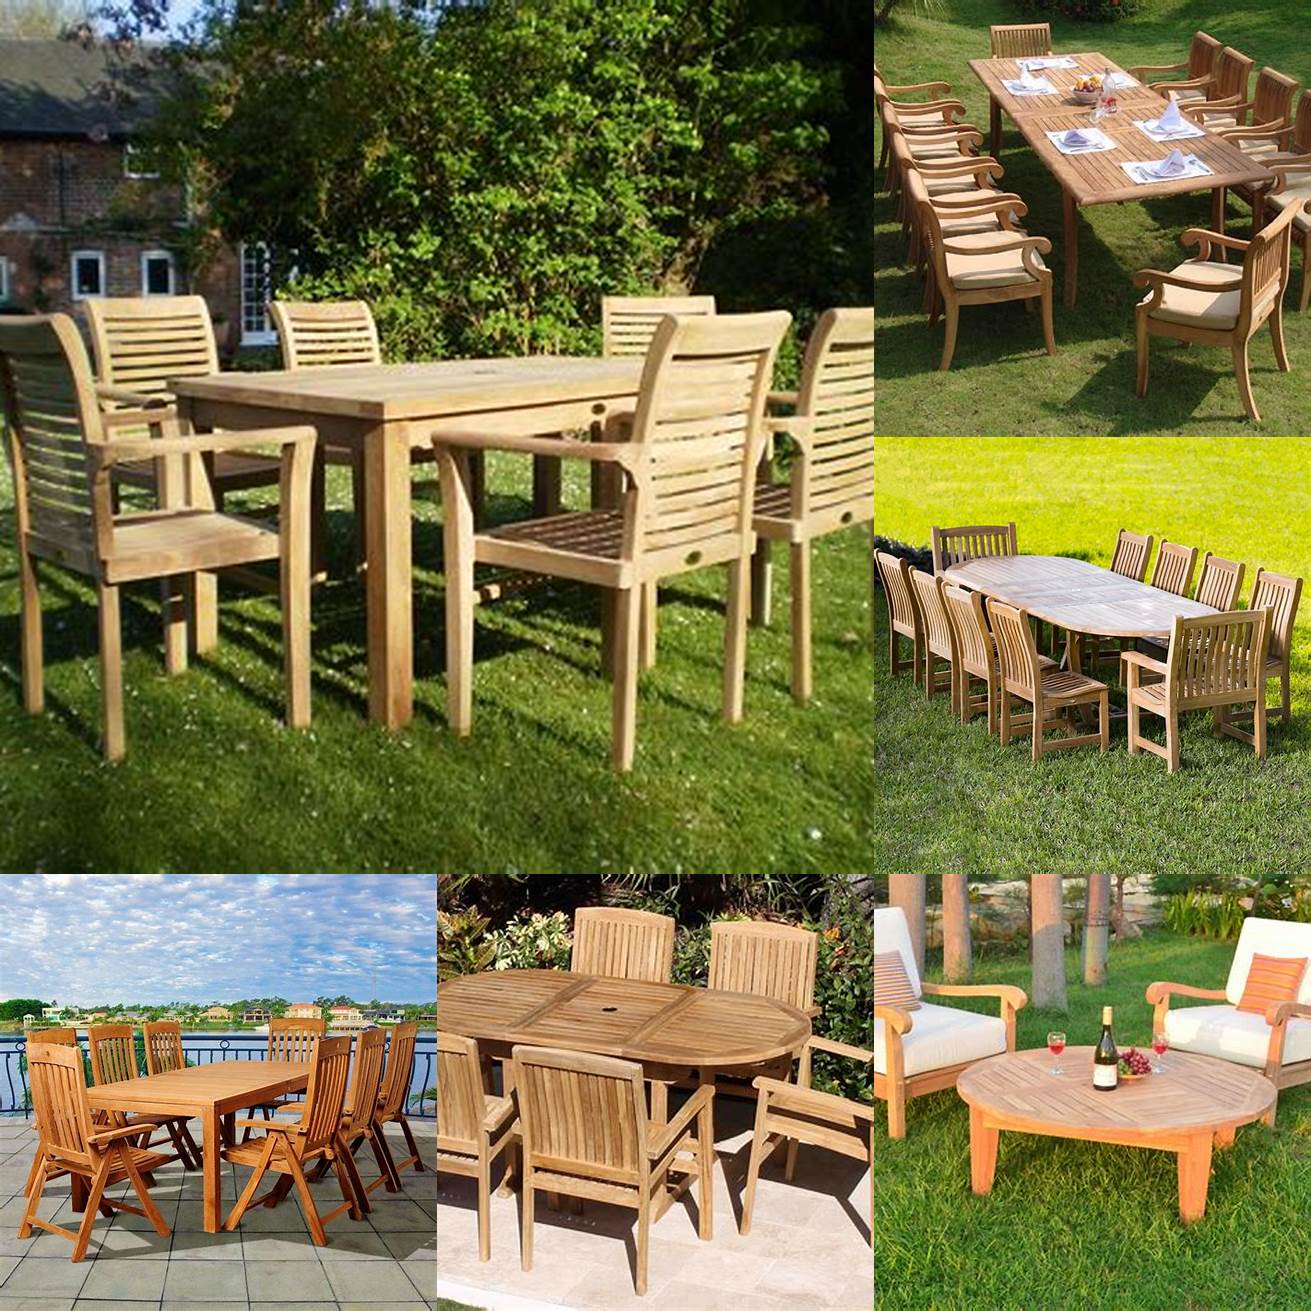 A picture of a patio set made of teak